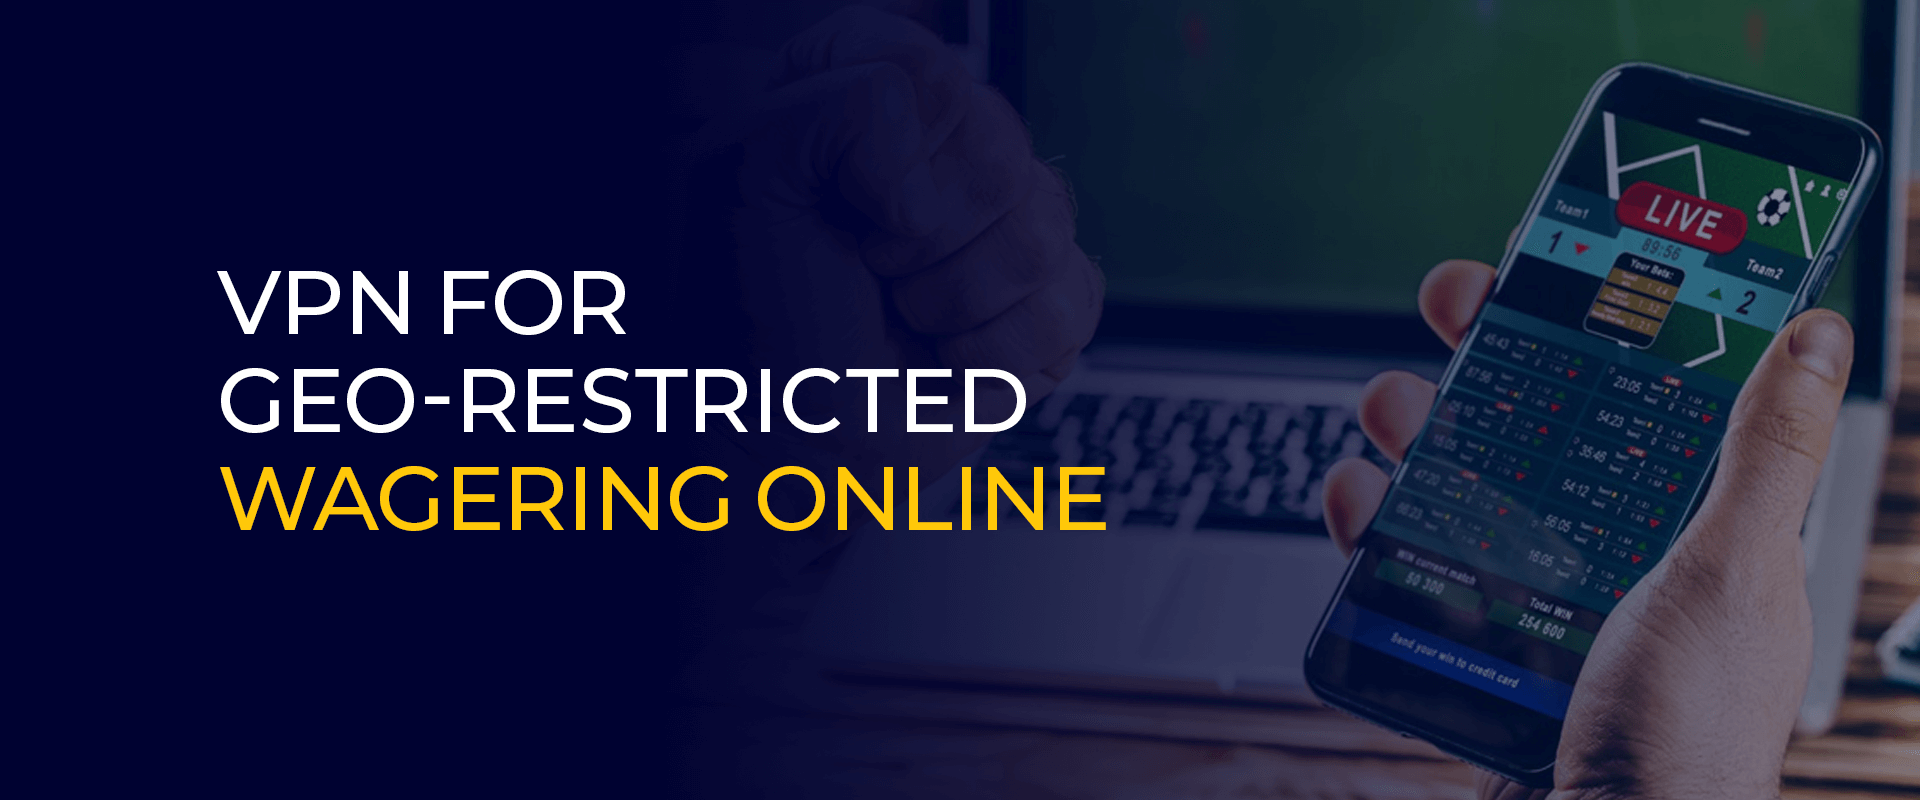 VPN for Geo-restricted Wagering Online